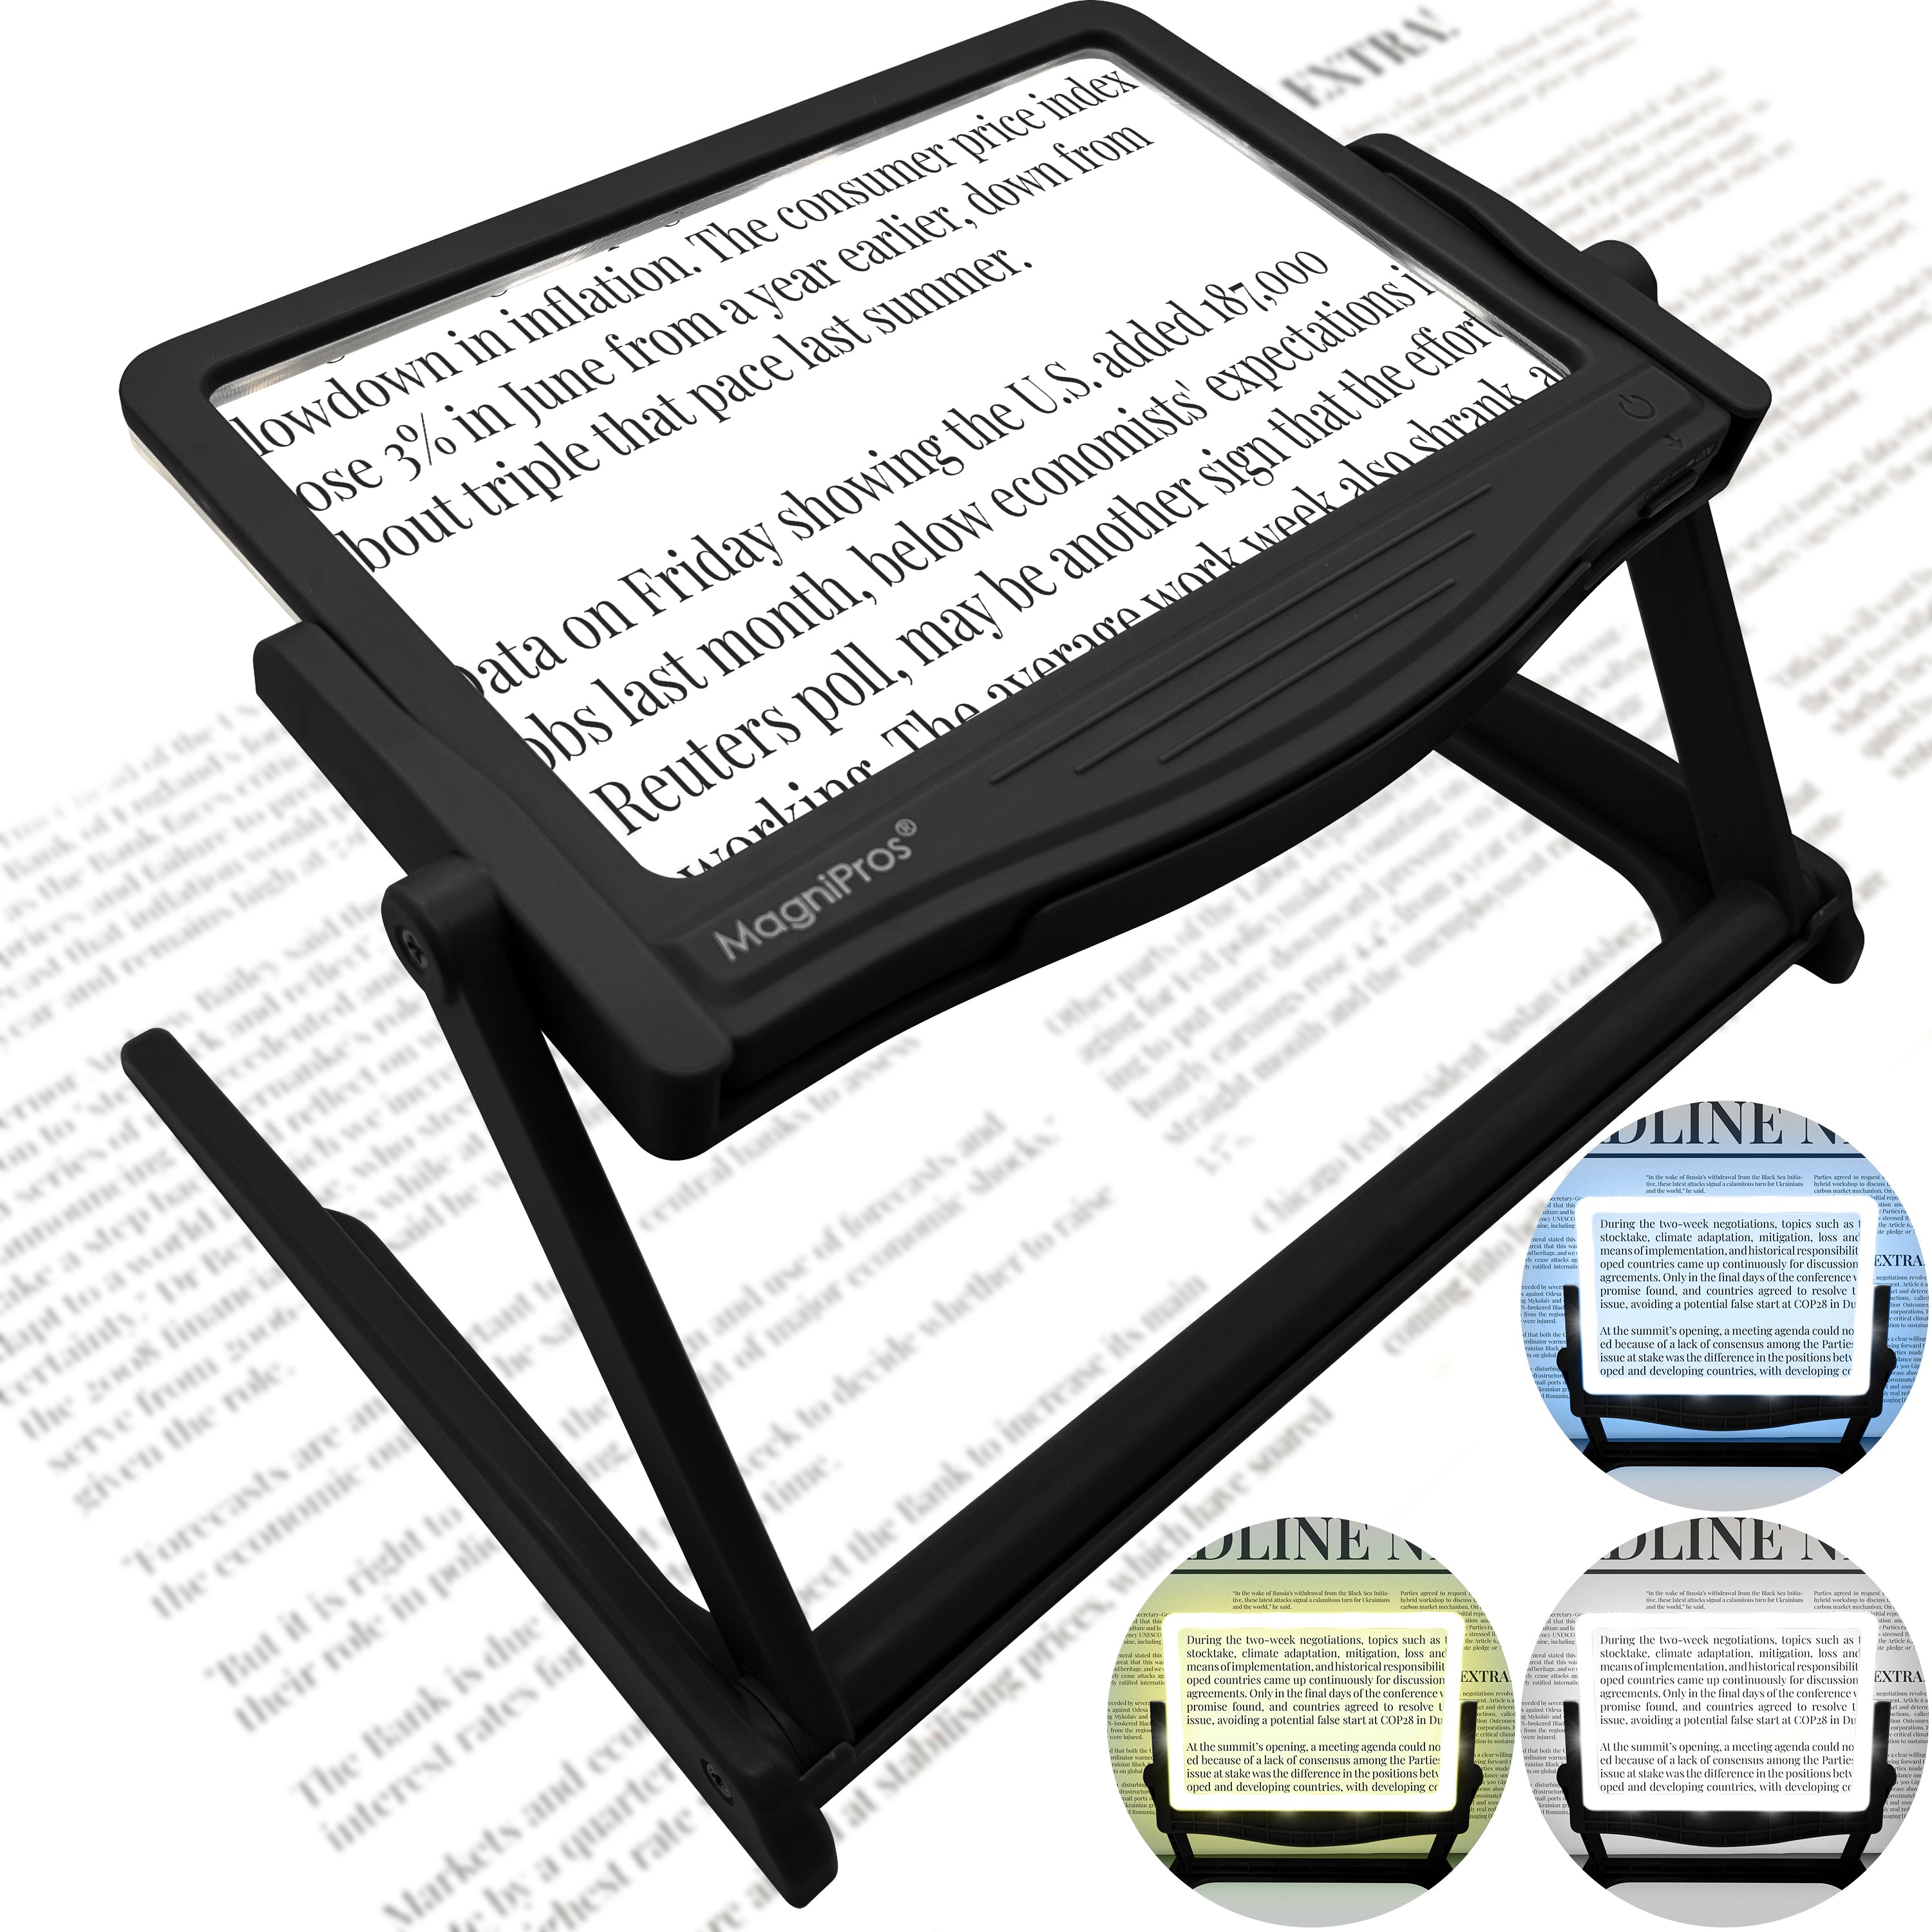 5x LED Page Magnifier with 3 Color Light Modes & Detachable Hands-Free –  MagniPros